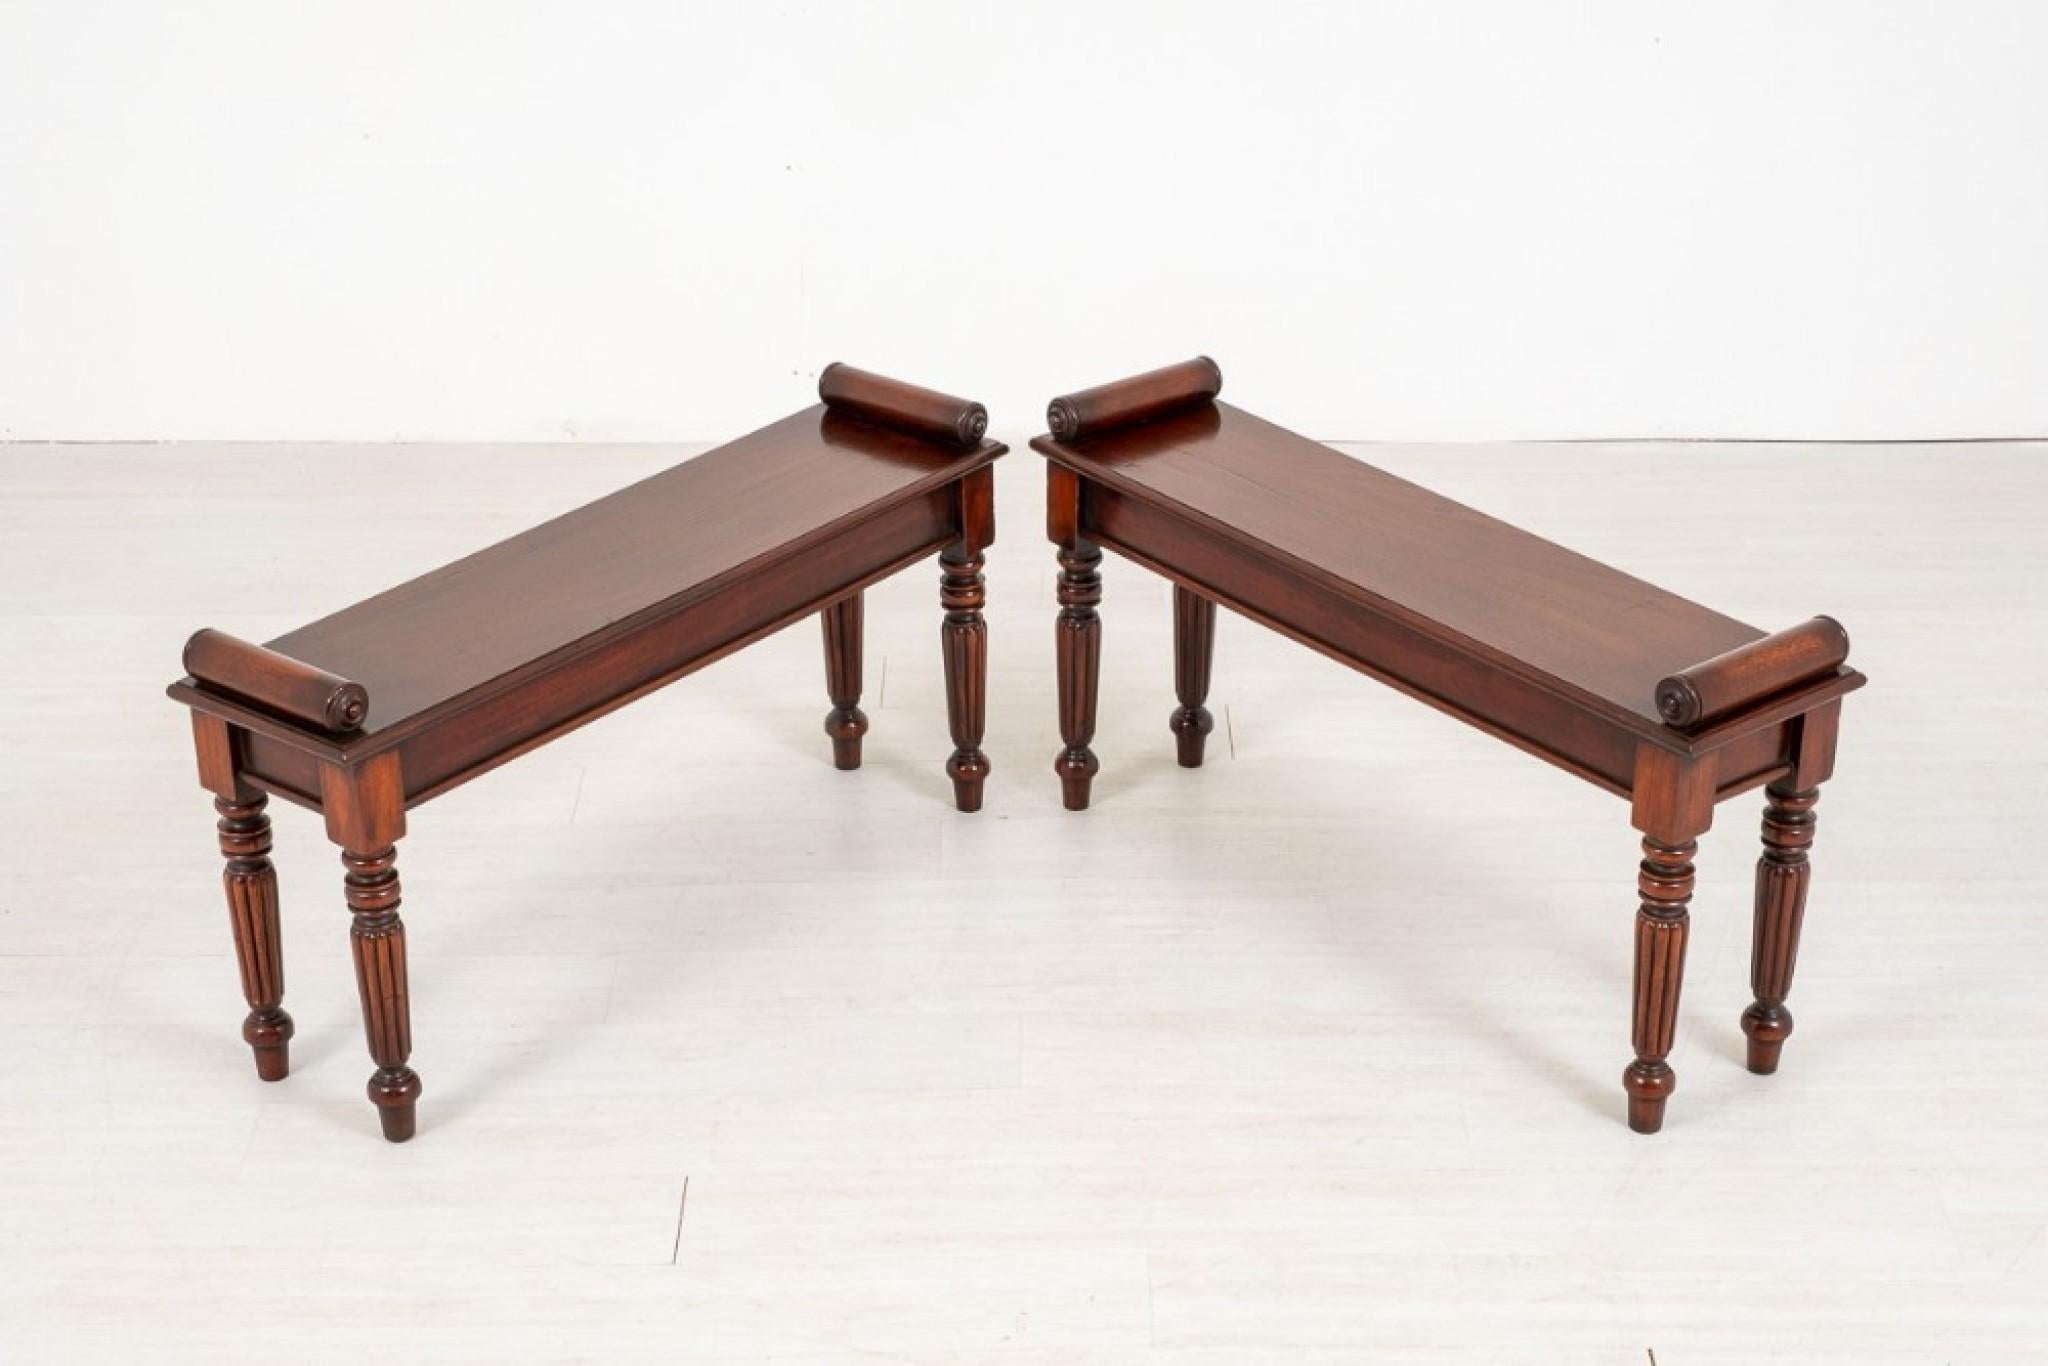 Pair of William IV Style Mahogany Window Seats.
A Very Nice Pair of Window Seats (unusual to get a pair)
Circa 1920
Raised Upon Ring Turned and Fluted Legs.
The Mahogany Seats Having Multi Mouldings and Finished with a Typical Turned Mahogany